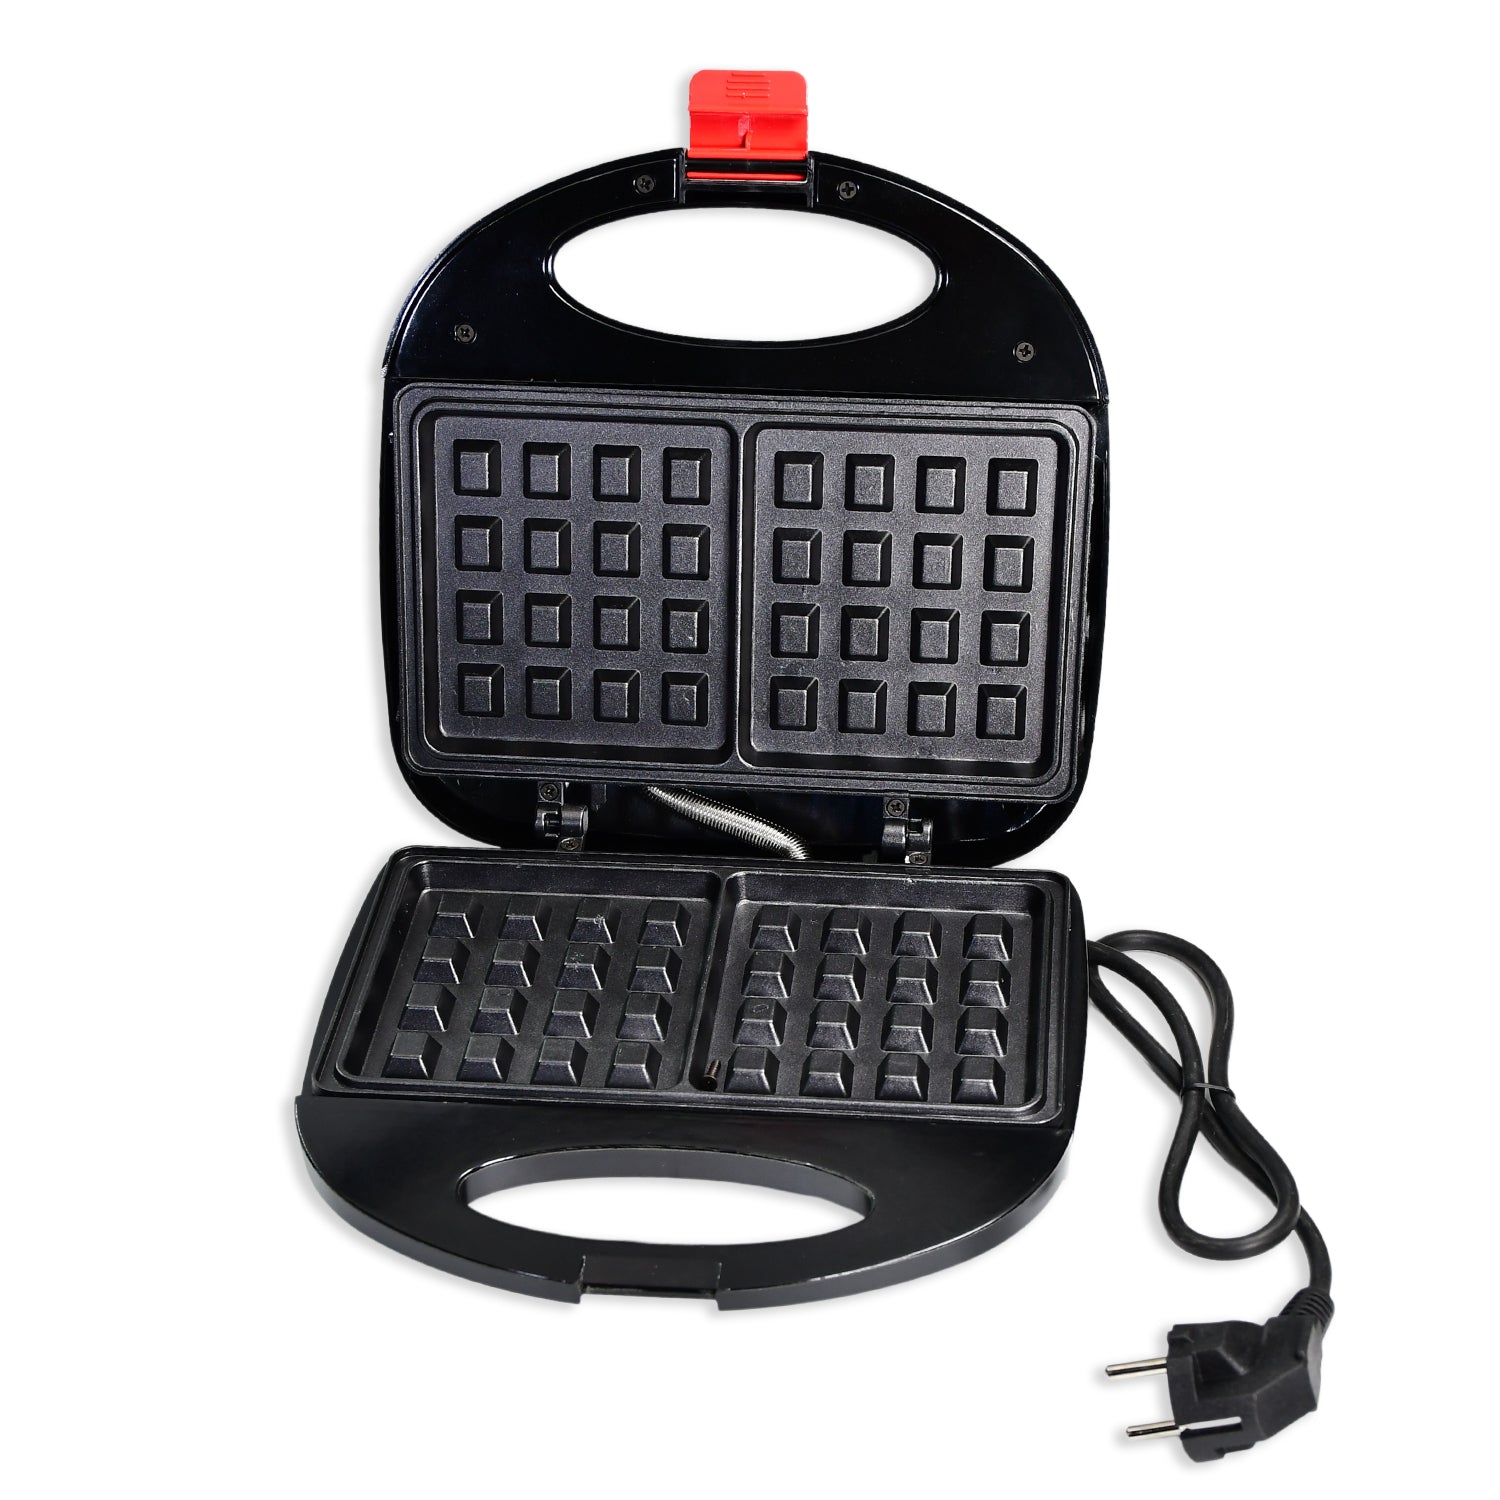 2817 Waffle Maker, Makes 2 Square Shape Waffles| Non-Stick Plates| Easy to Use with Indicator Lights DeoDap